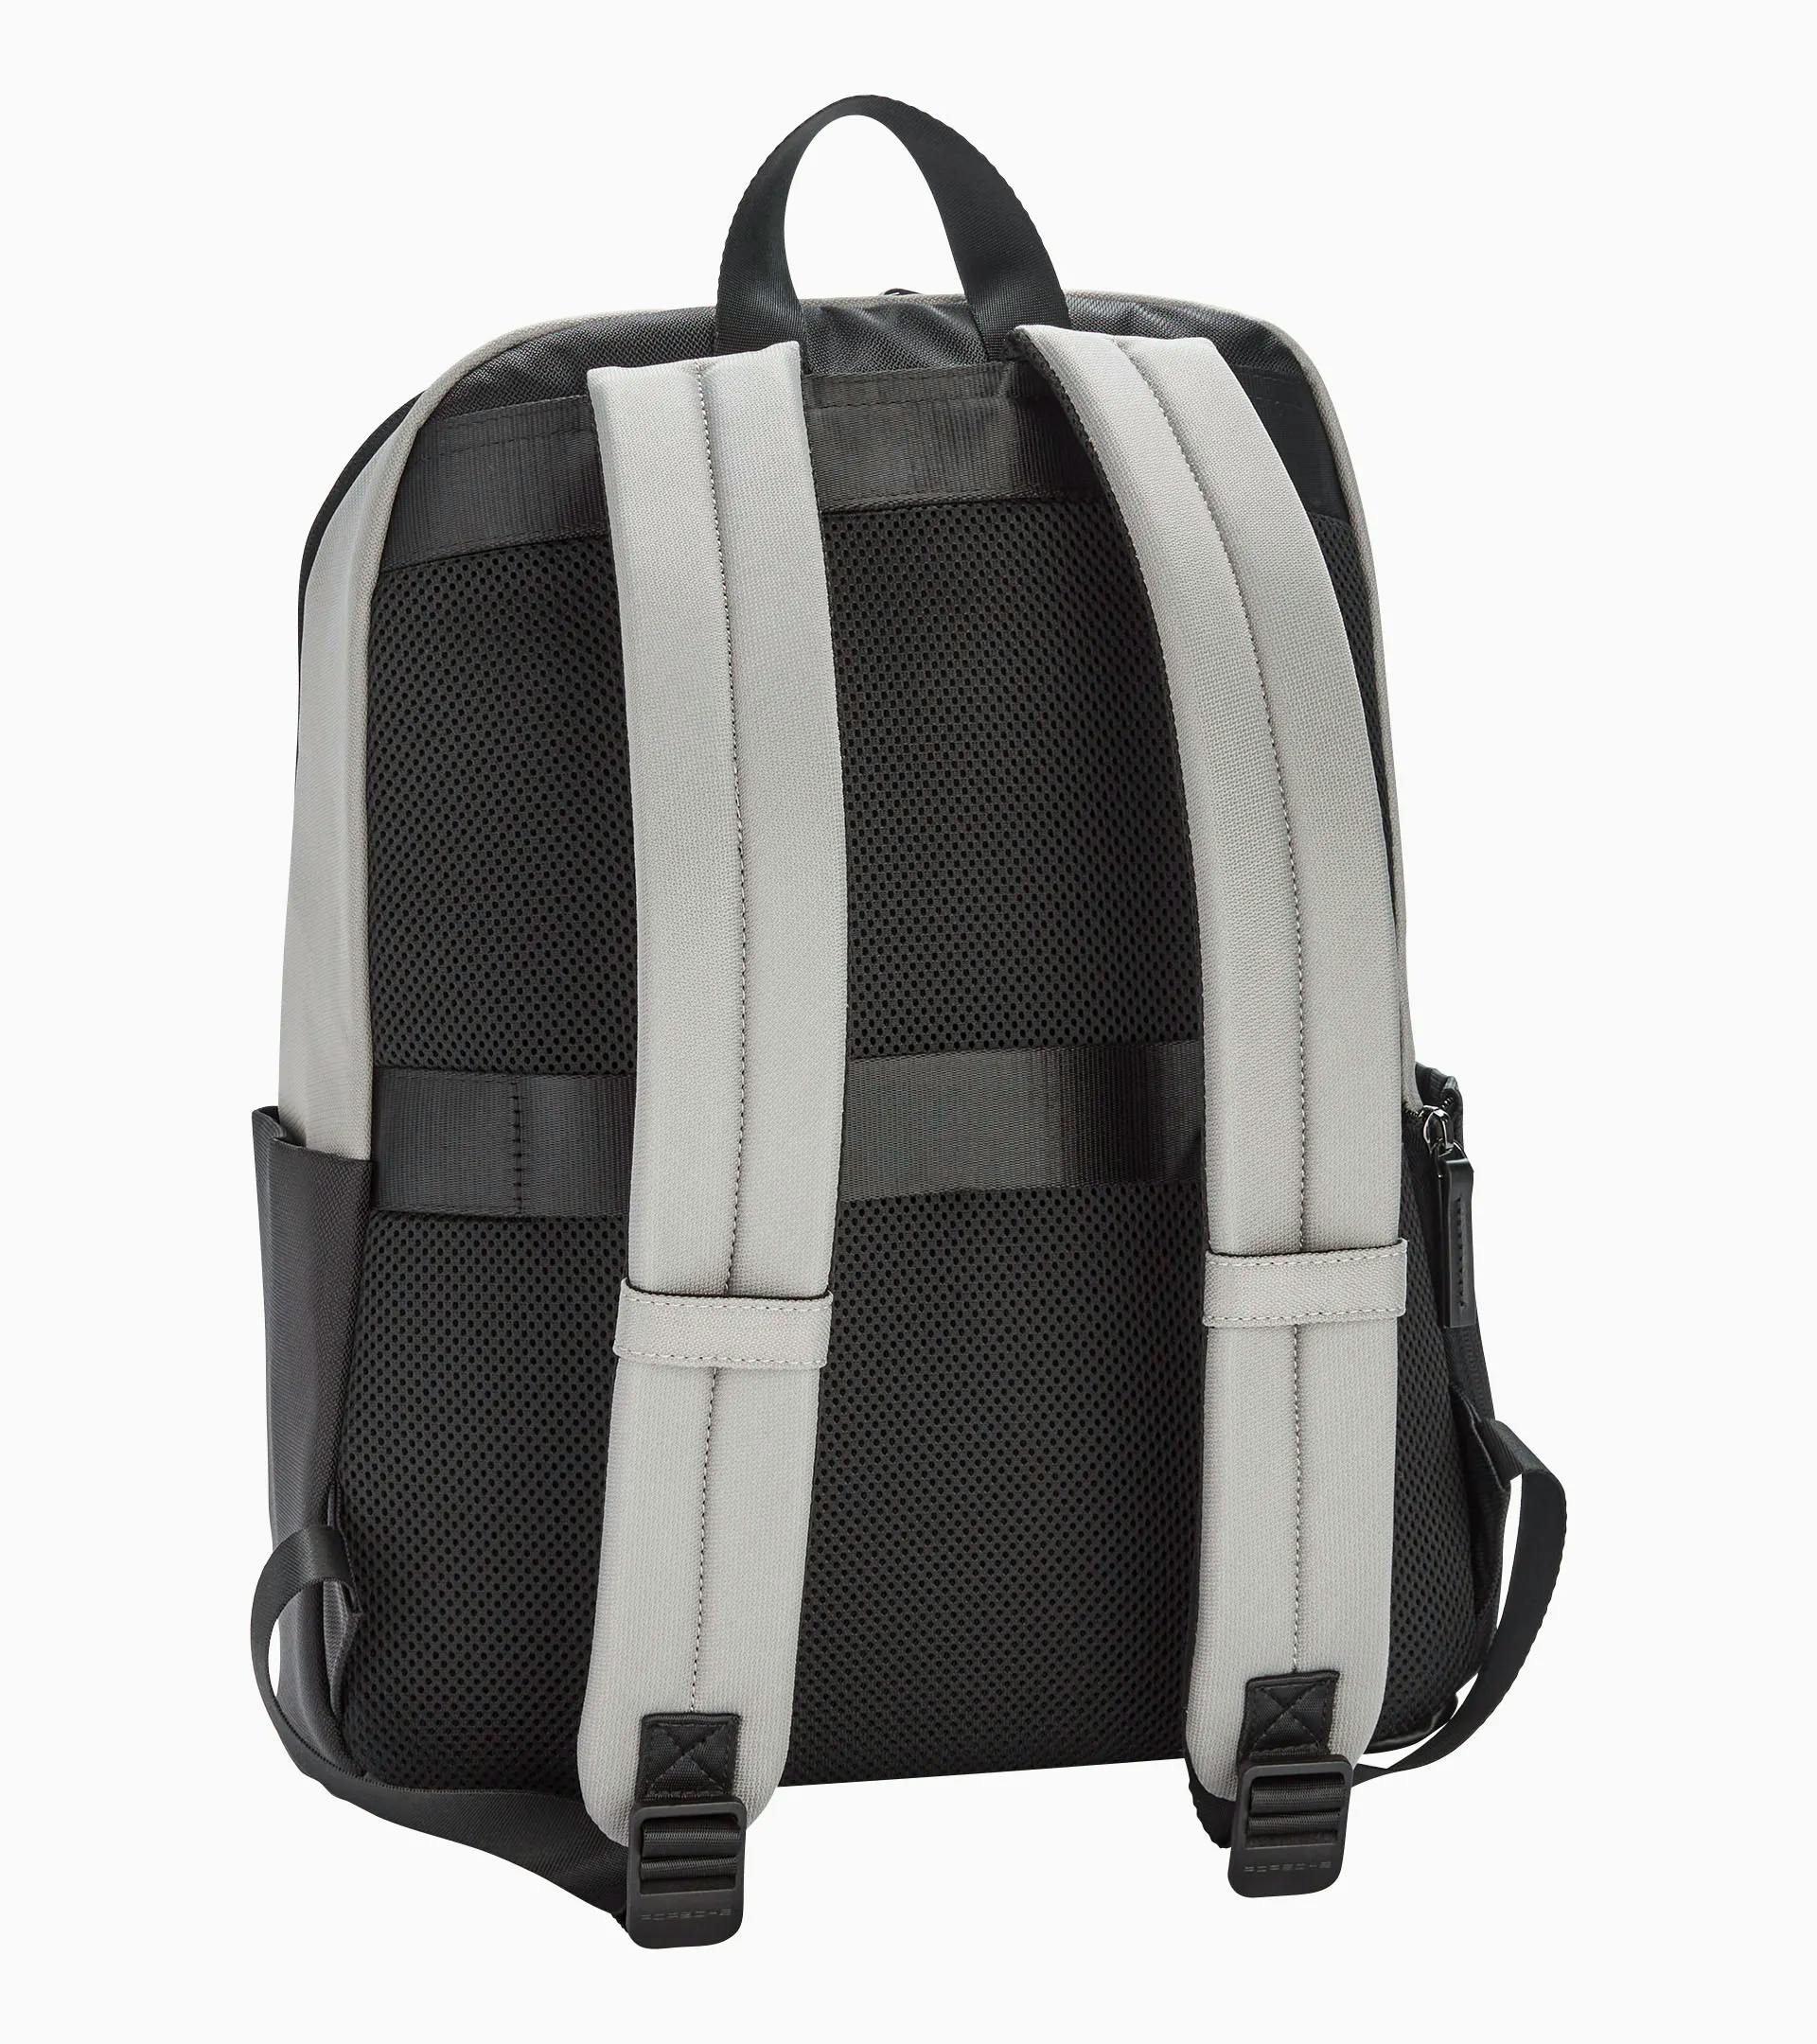 Backpack – Turbo No. 1 2